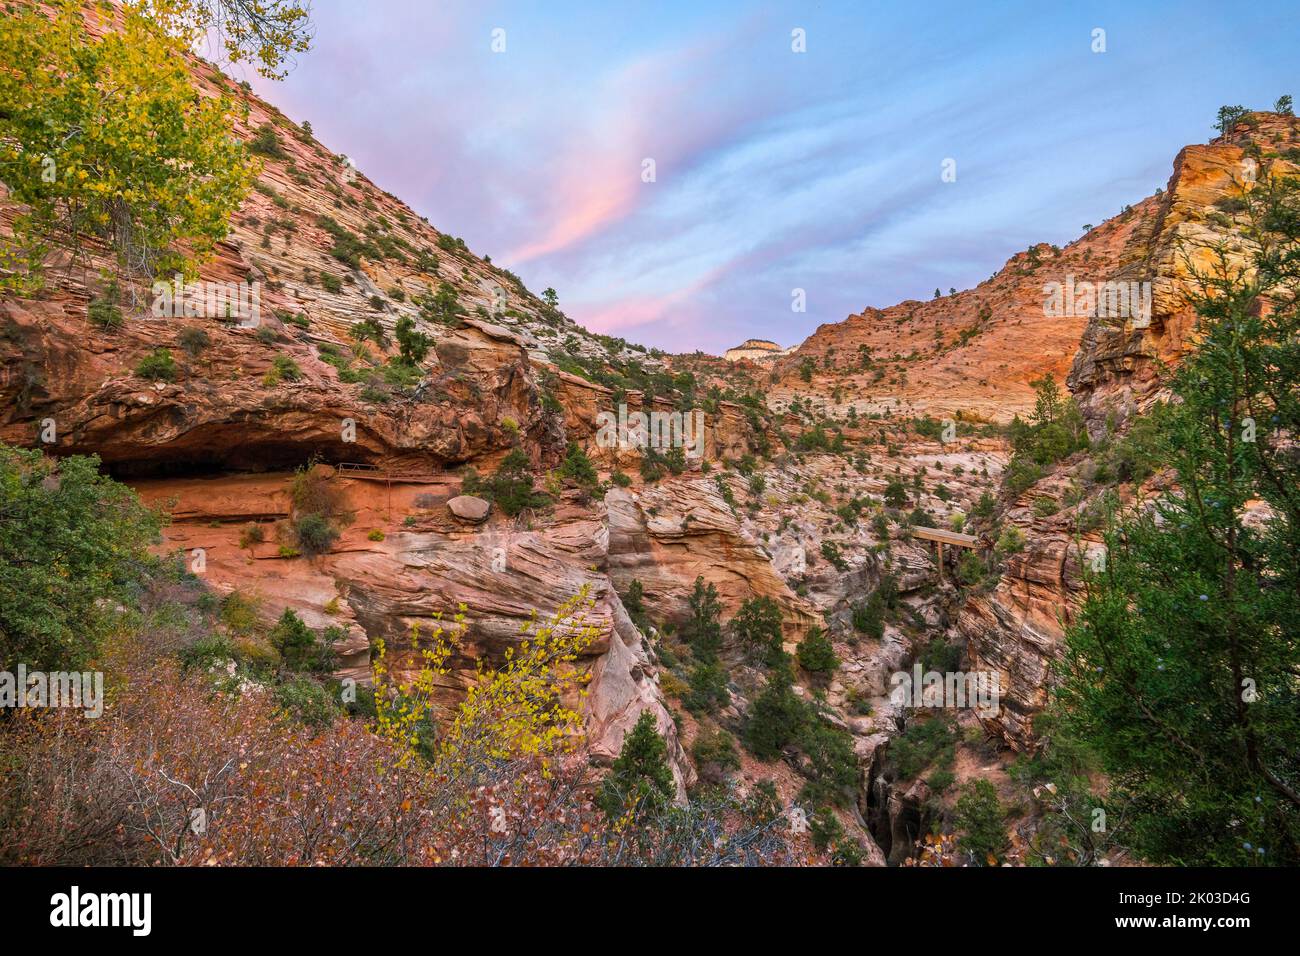 Zion National Park is located in southwestern Utah on the border with Arizona. It has an area of 579 kö² and lies between 1128 m and 2660 m altitude. View from Canyon Overlook Trail into Pine Creek Canyon. Stock Photo